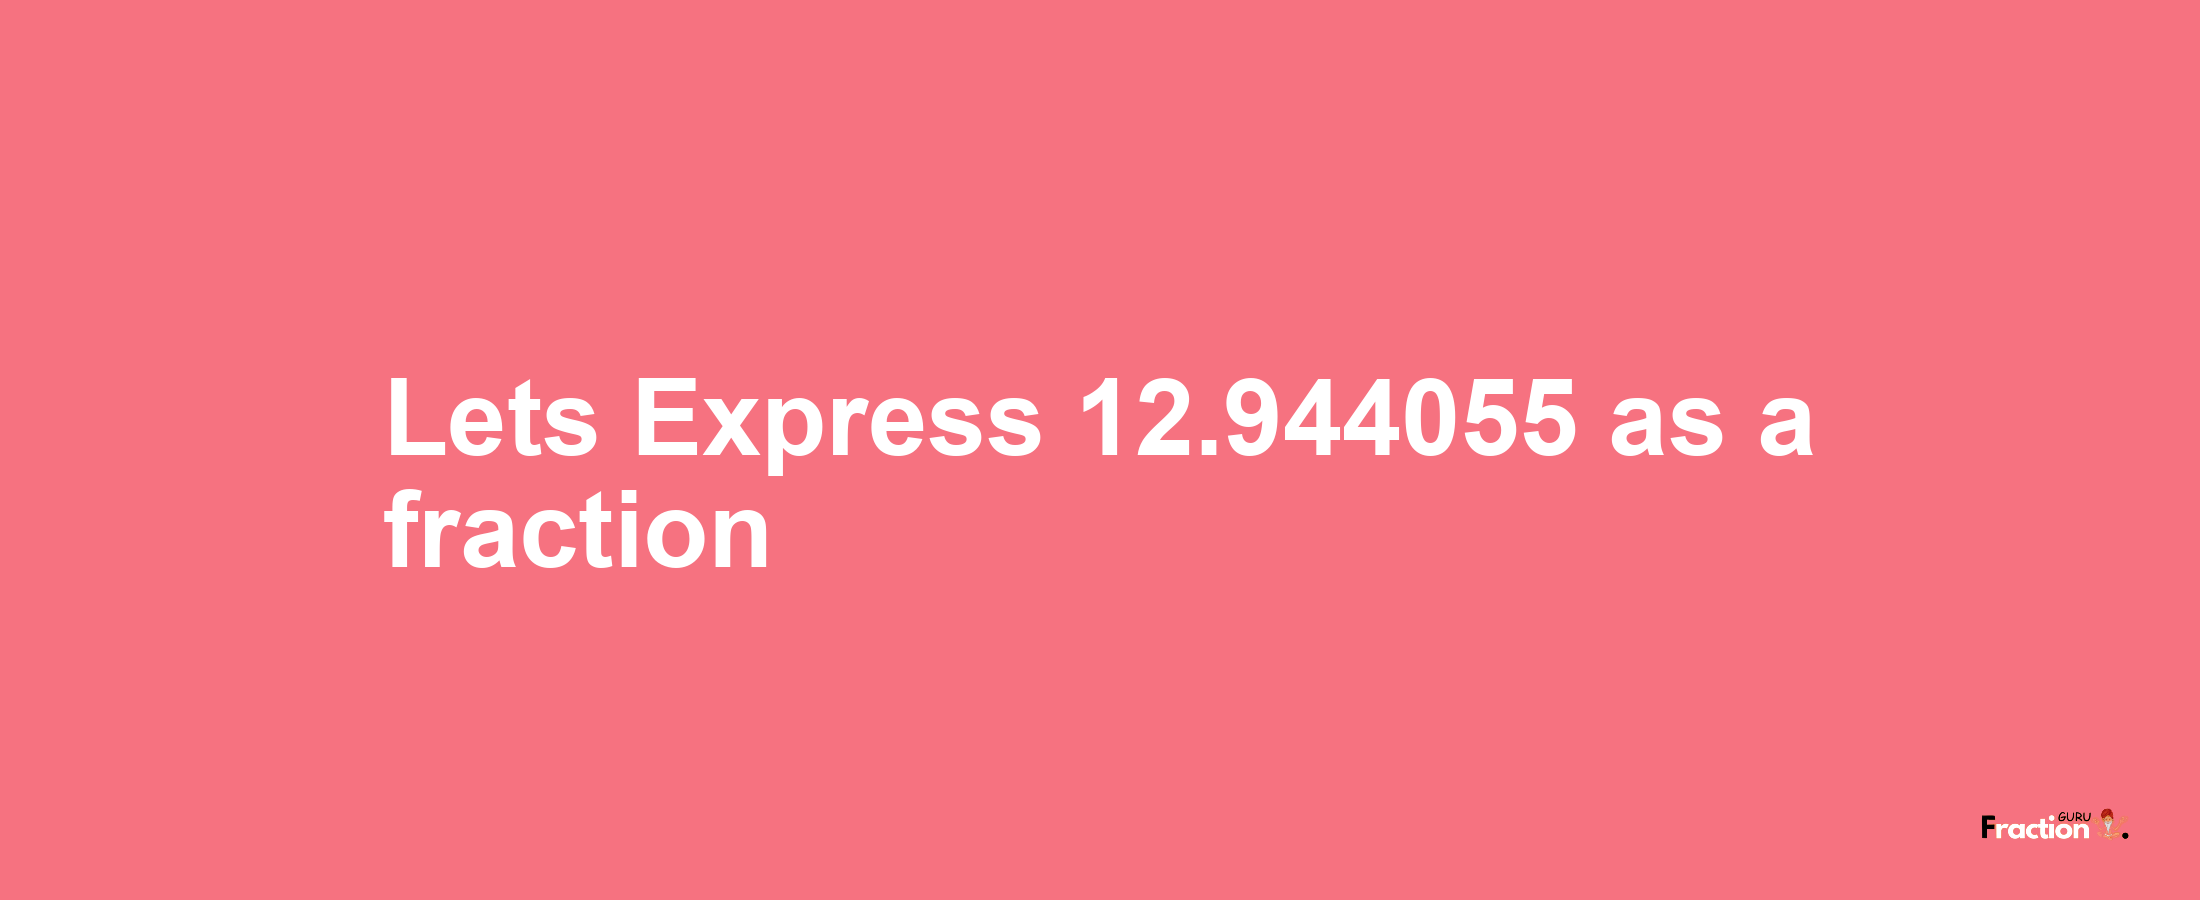 Lets Express 12.944055 as afraction